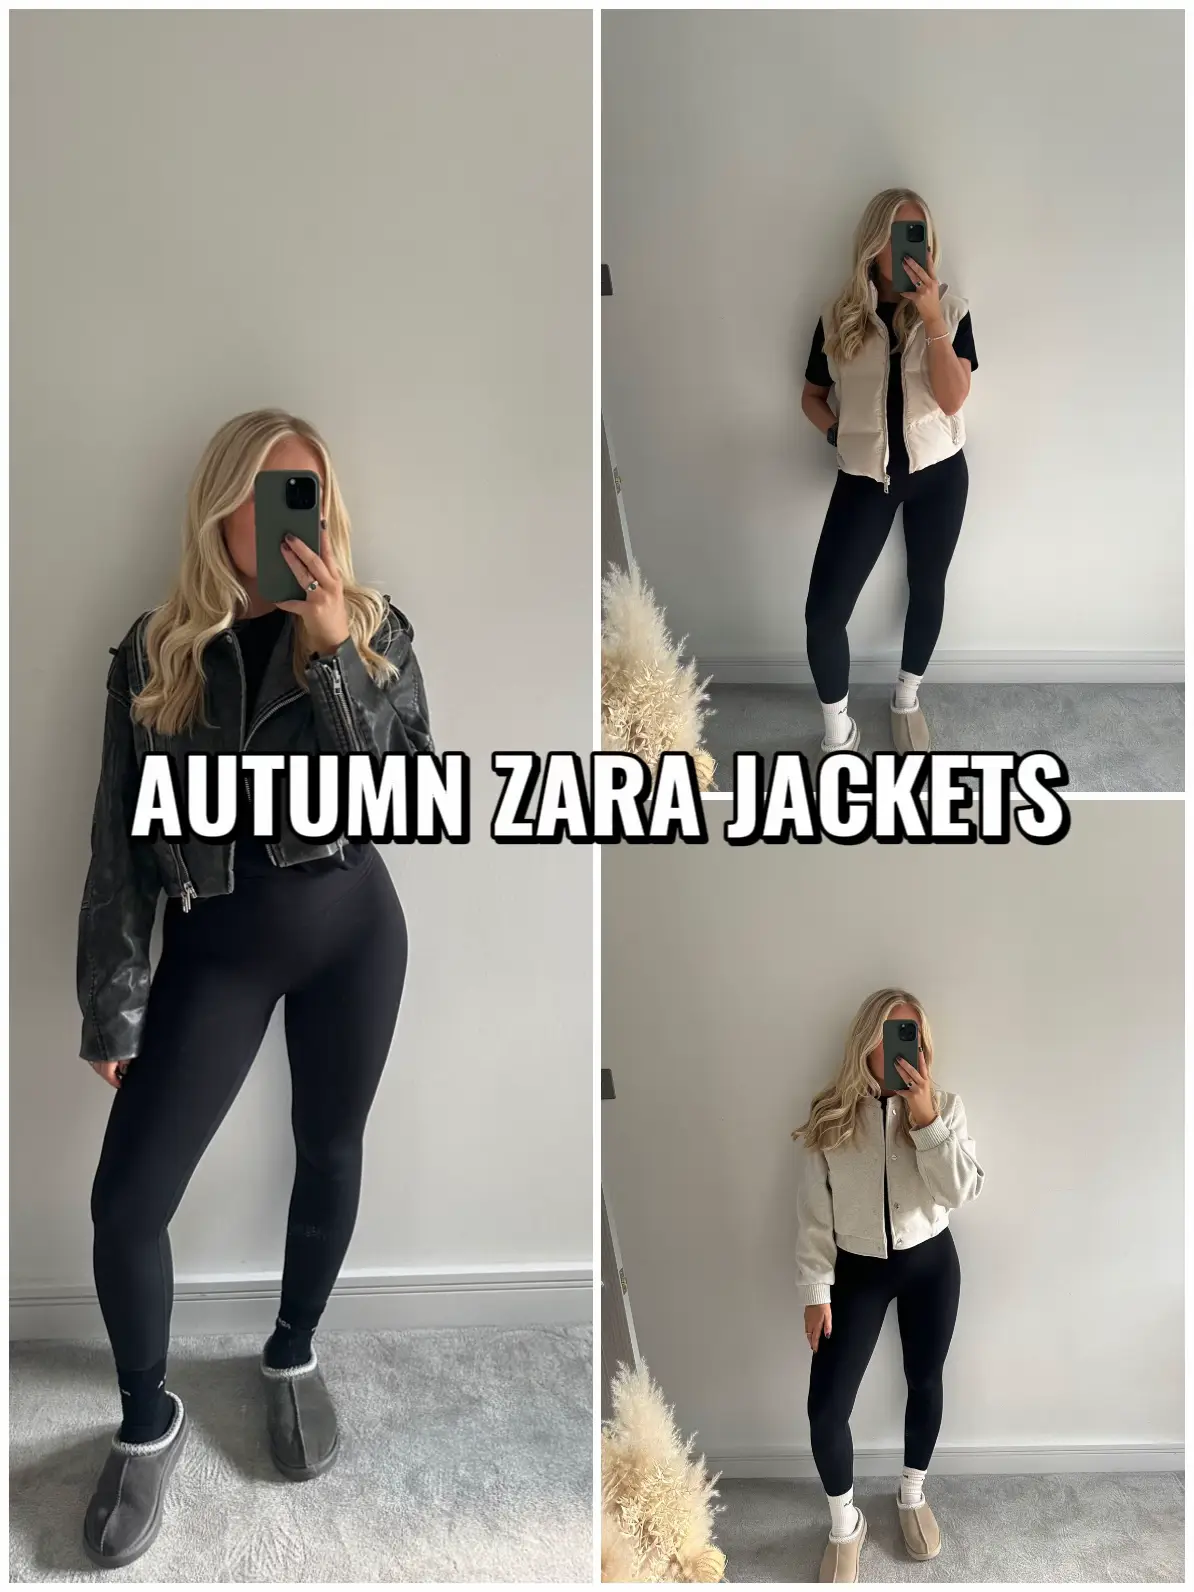 An autumn winter staple & a new take on the viral 'molly mae jacket' f, ZARA Jackets